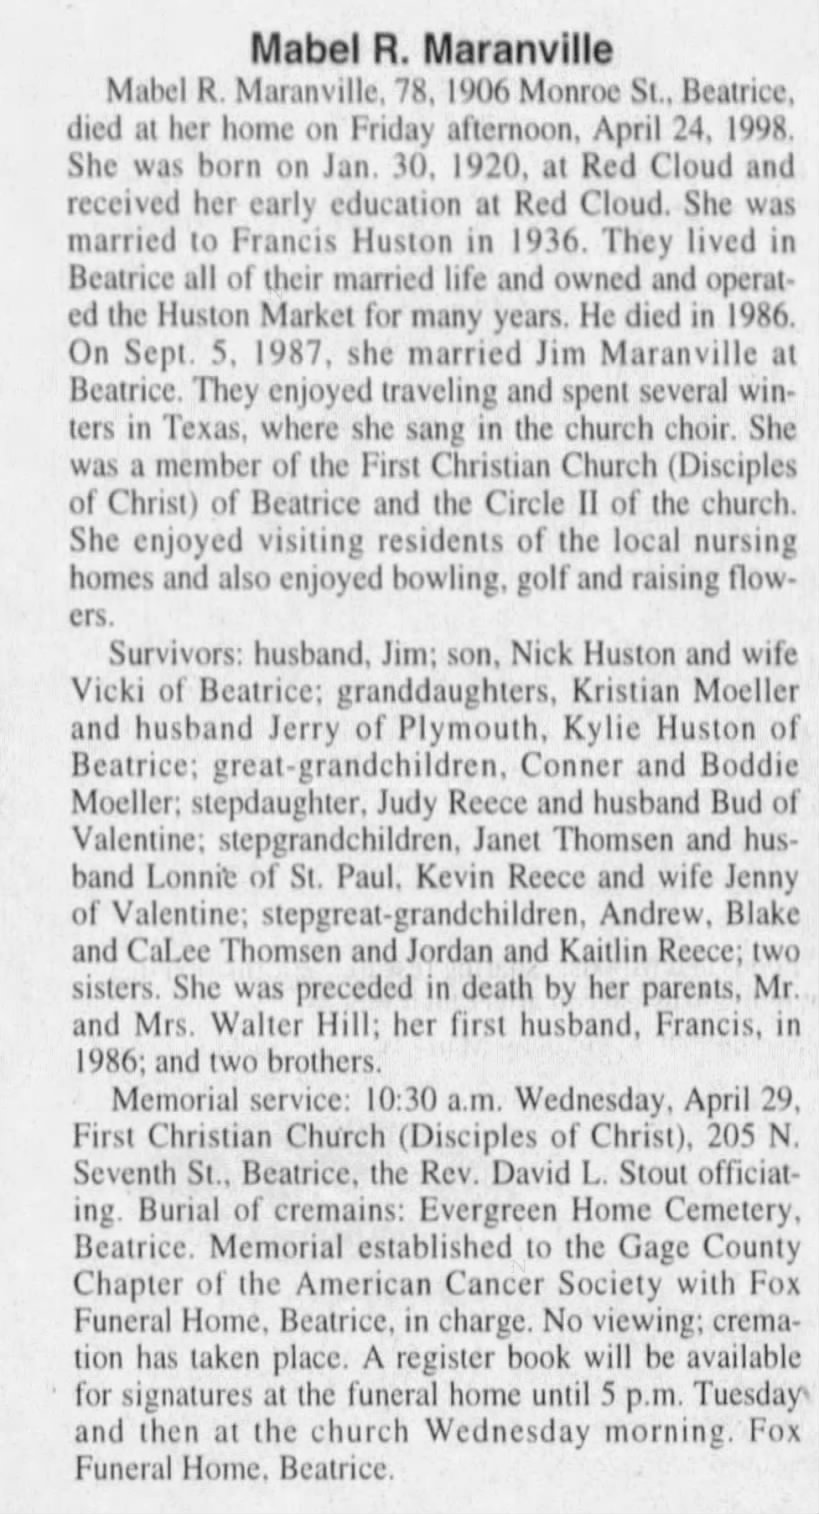 Obituary for Mabel R. Maranville, 1920-1998 (Aged 78)